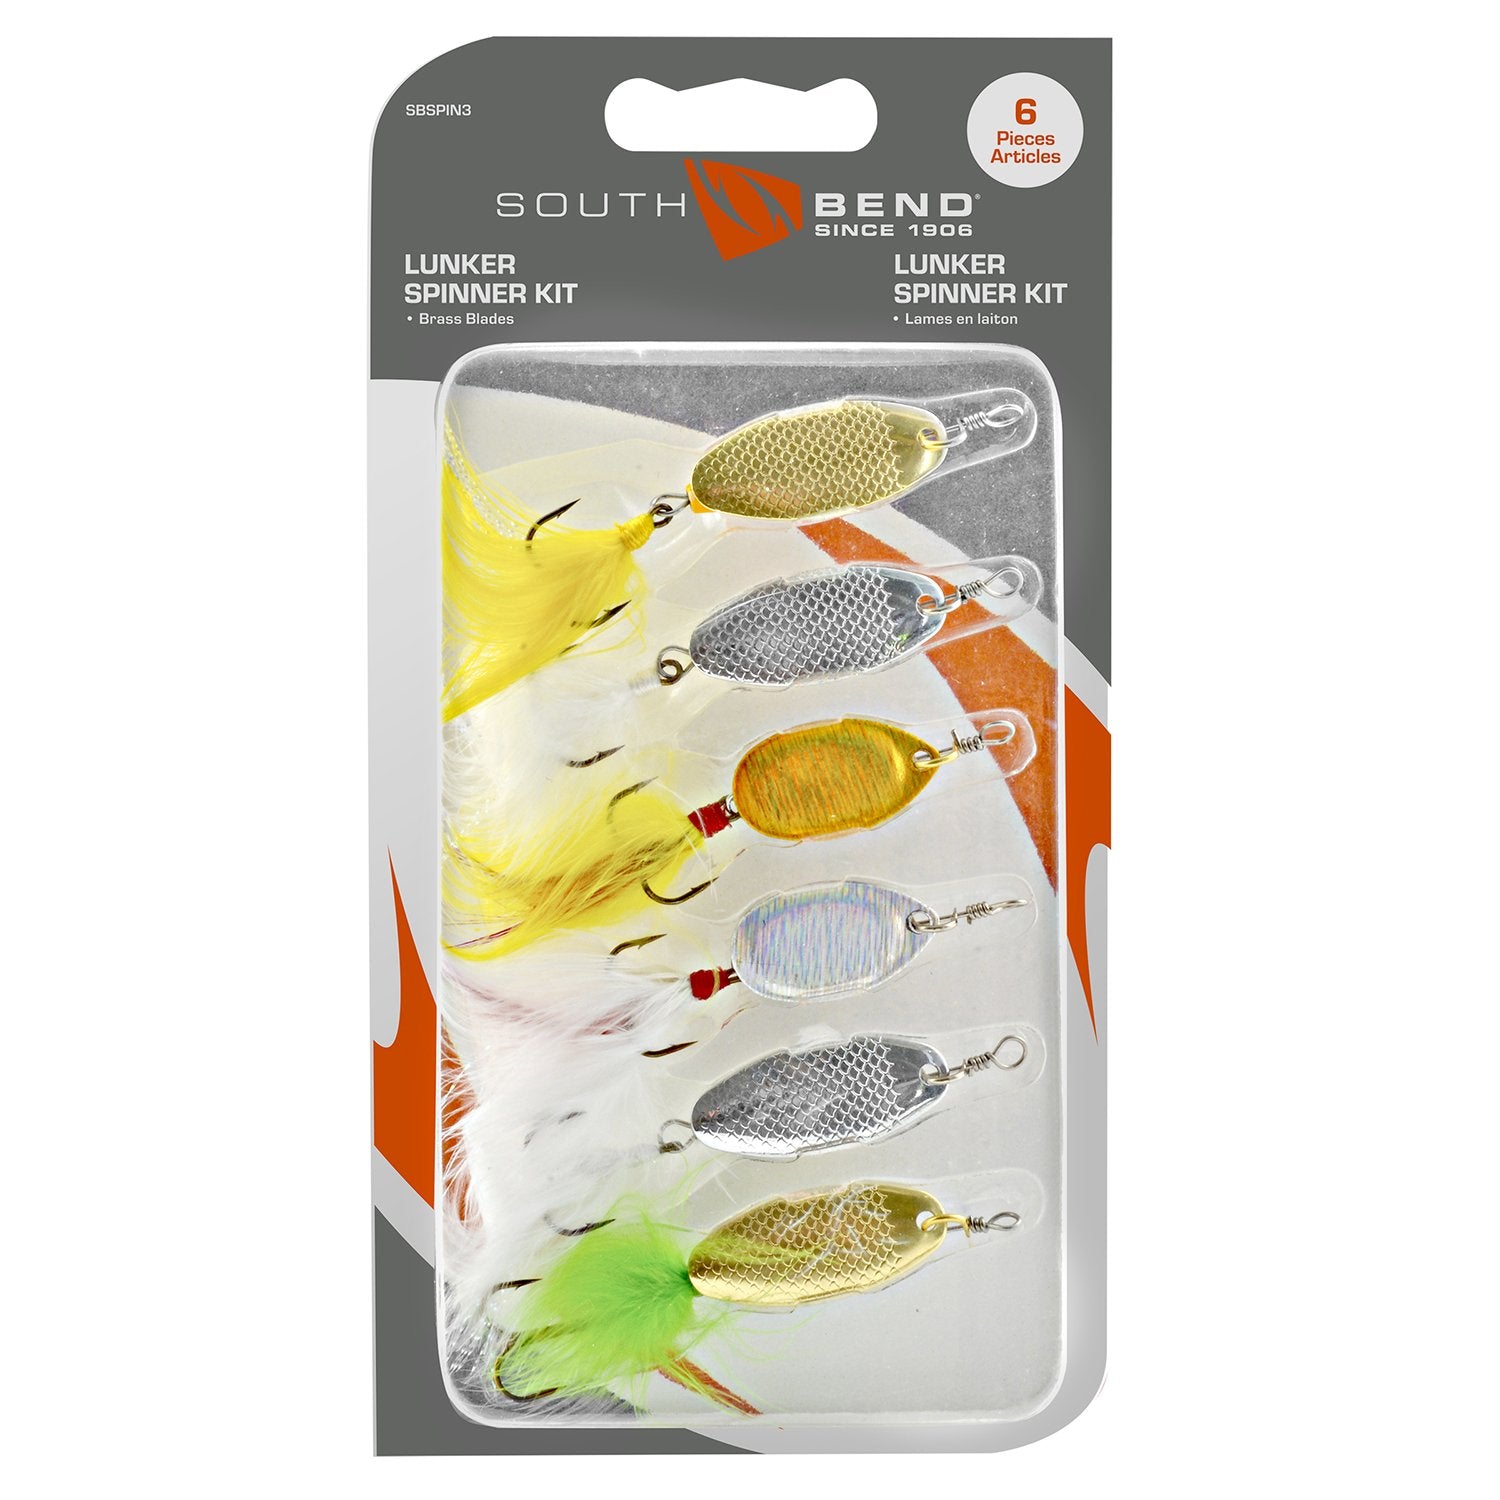  Dr.Fish 98 Pack Inline Spinner Making Kit Lure Making Kit  Spinner Blades Accessories Supplies Crappie Panfish Spinnerbait Bass Trout  Fearther Treble Hooks : Sports & Outdoors